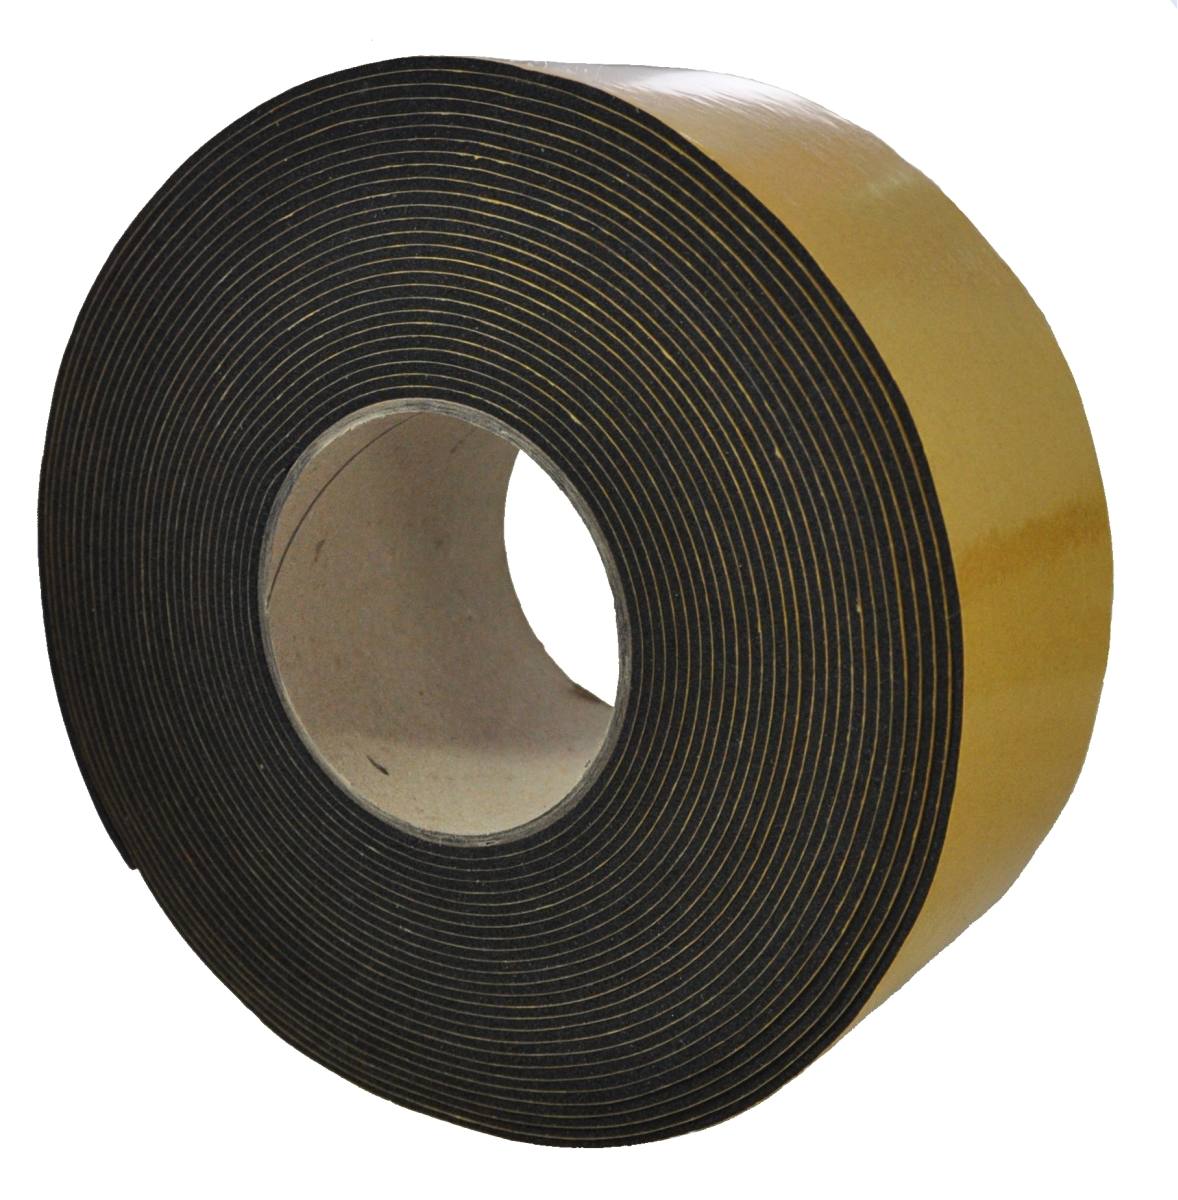 S-K-S EPDM 3mmx15mmx10m black self-adhesive on one side